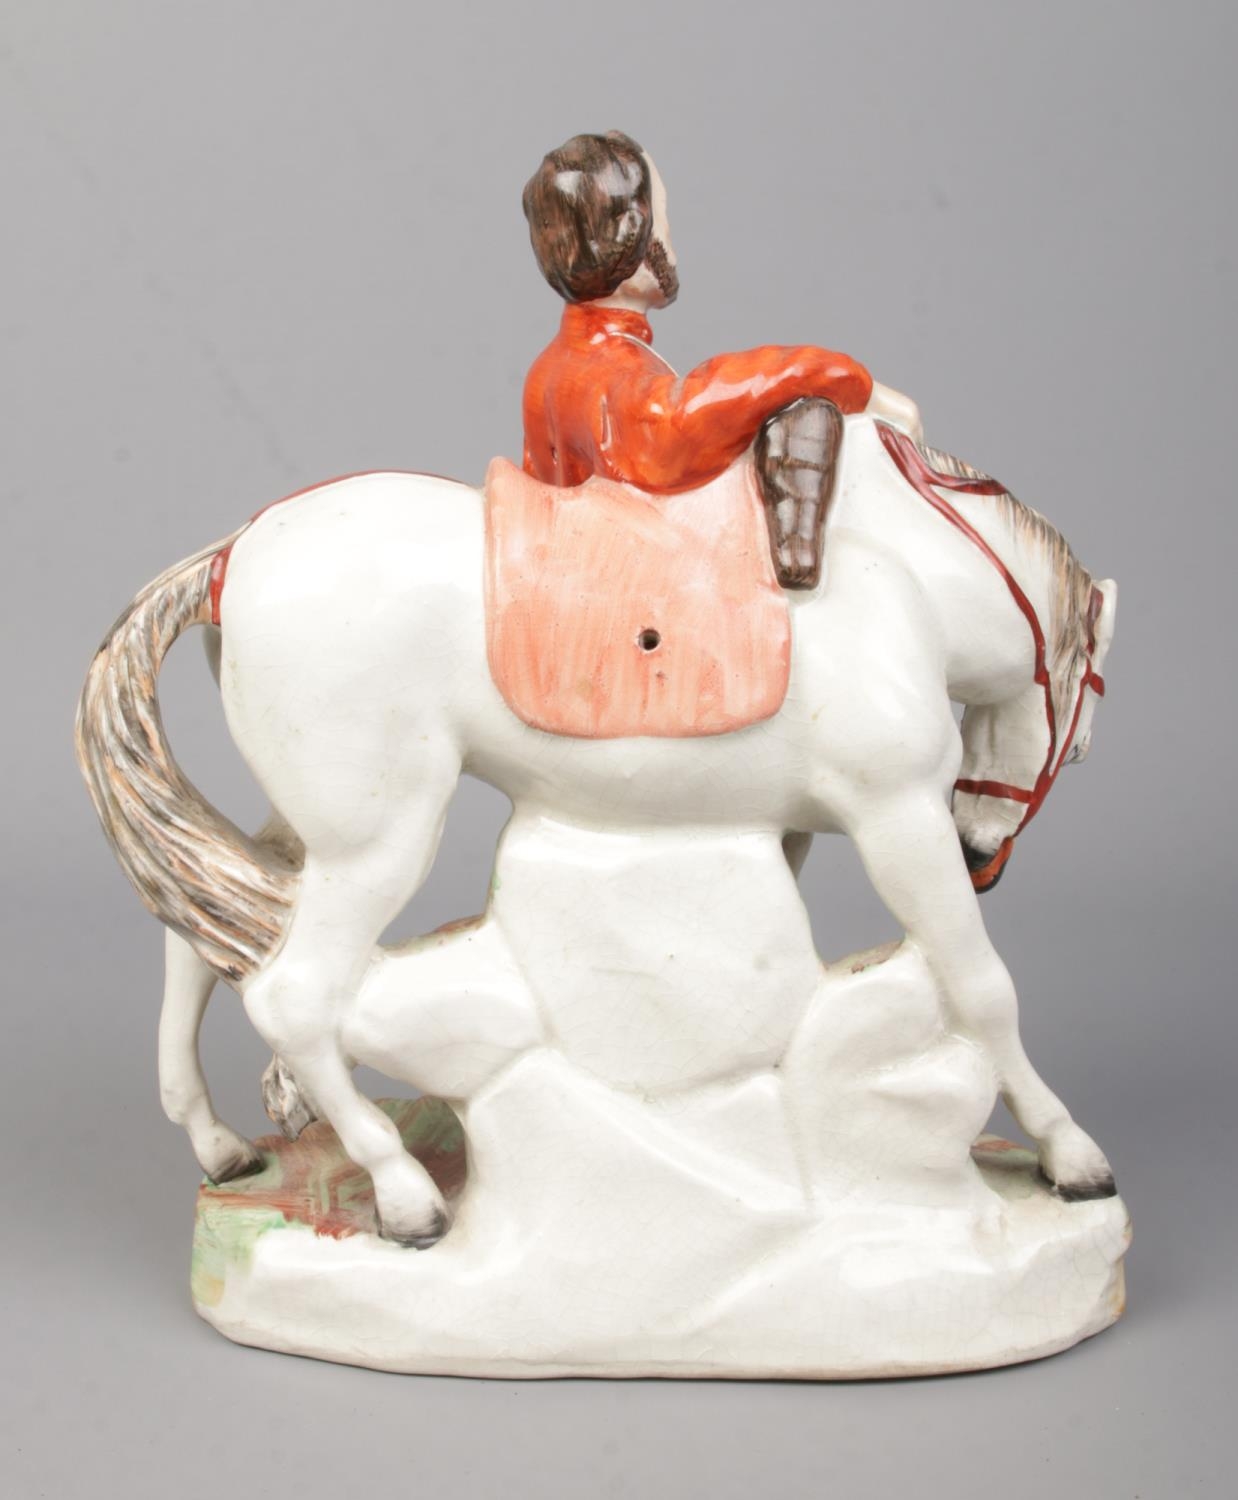 A 19th century Staffordshire figure, Giuseppe Garibaldi and horse, by Thomas Parr. Height 23cm. - Image 2 of 3